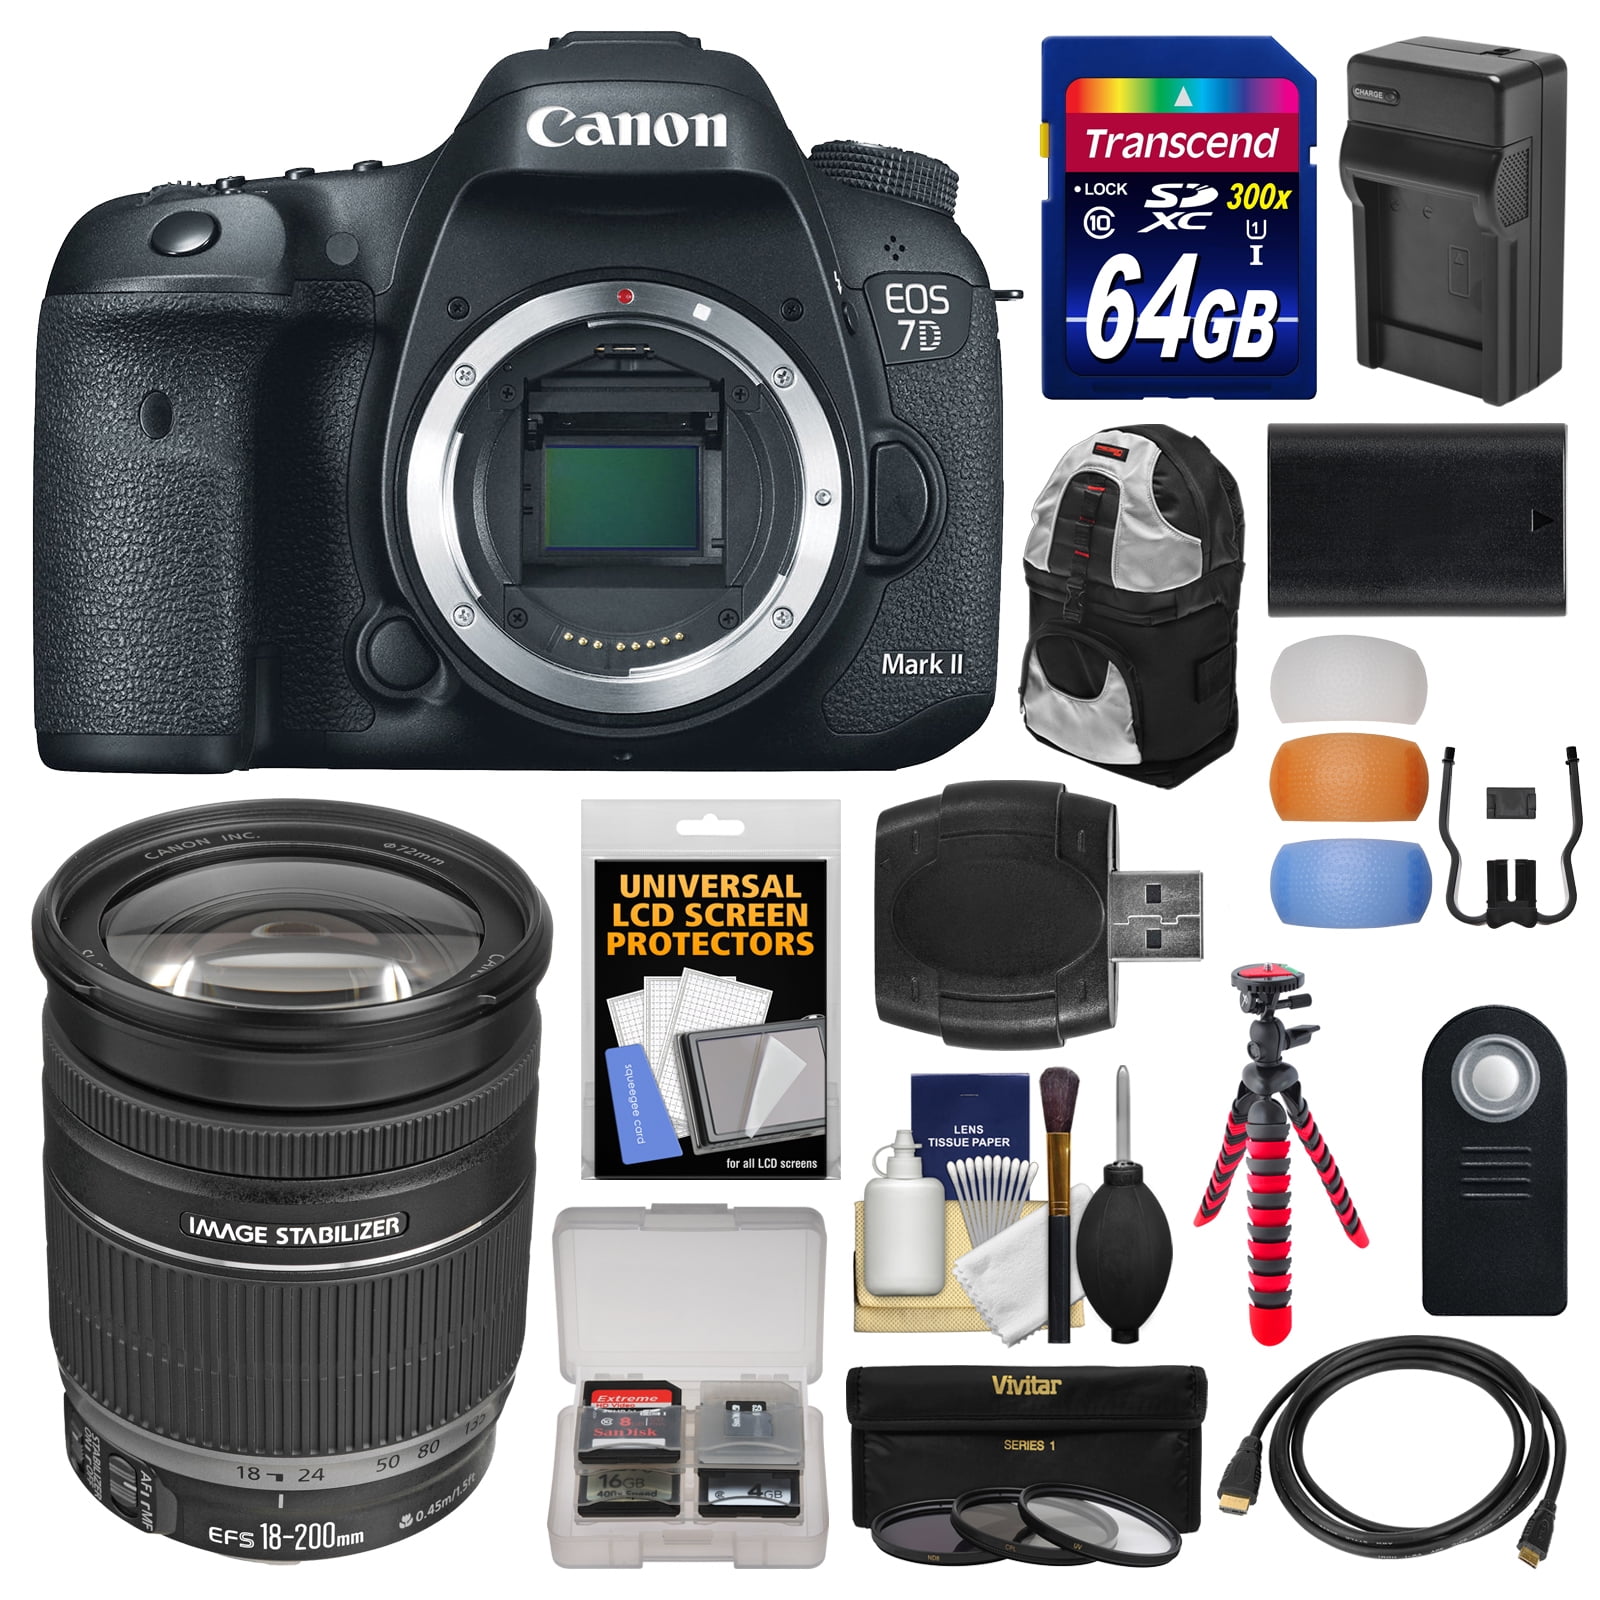 Canon EOS 7D Mark II GPS Digital SLR Camera Body with 18 200mm IS Lens + 64GB Card + Backpack + Battery/Charger + Tripod + Kit